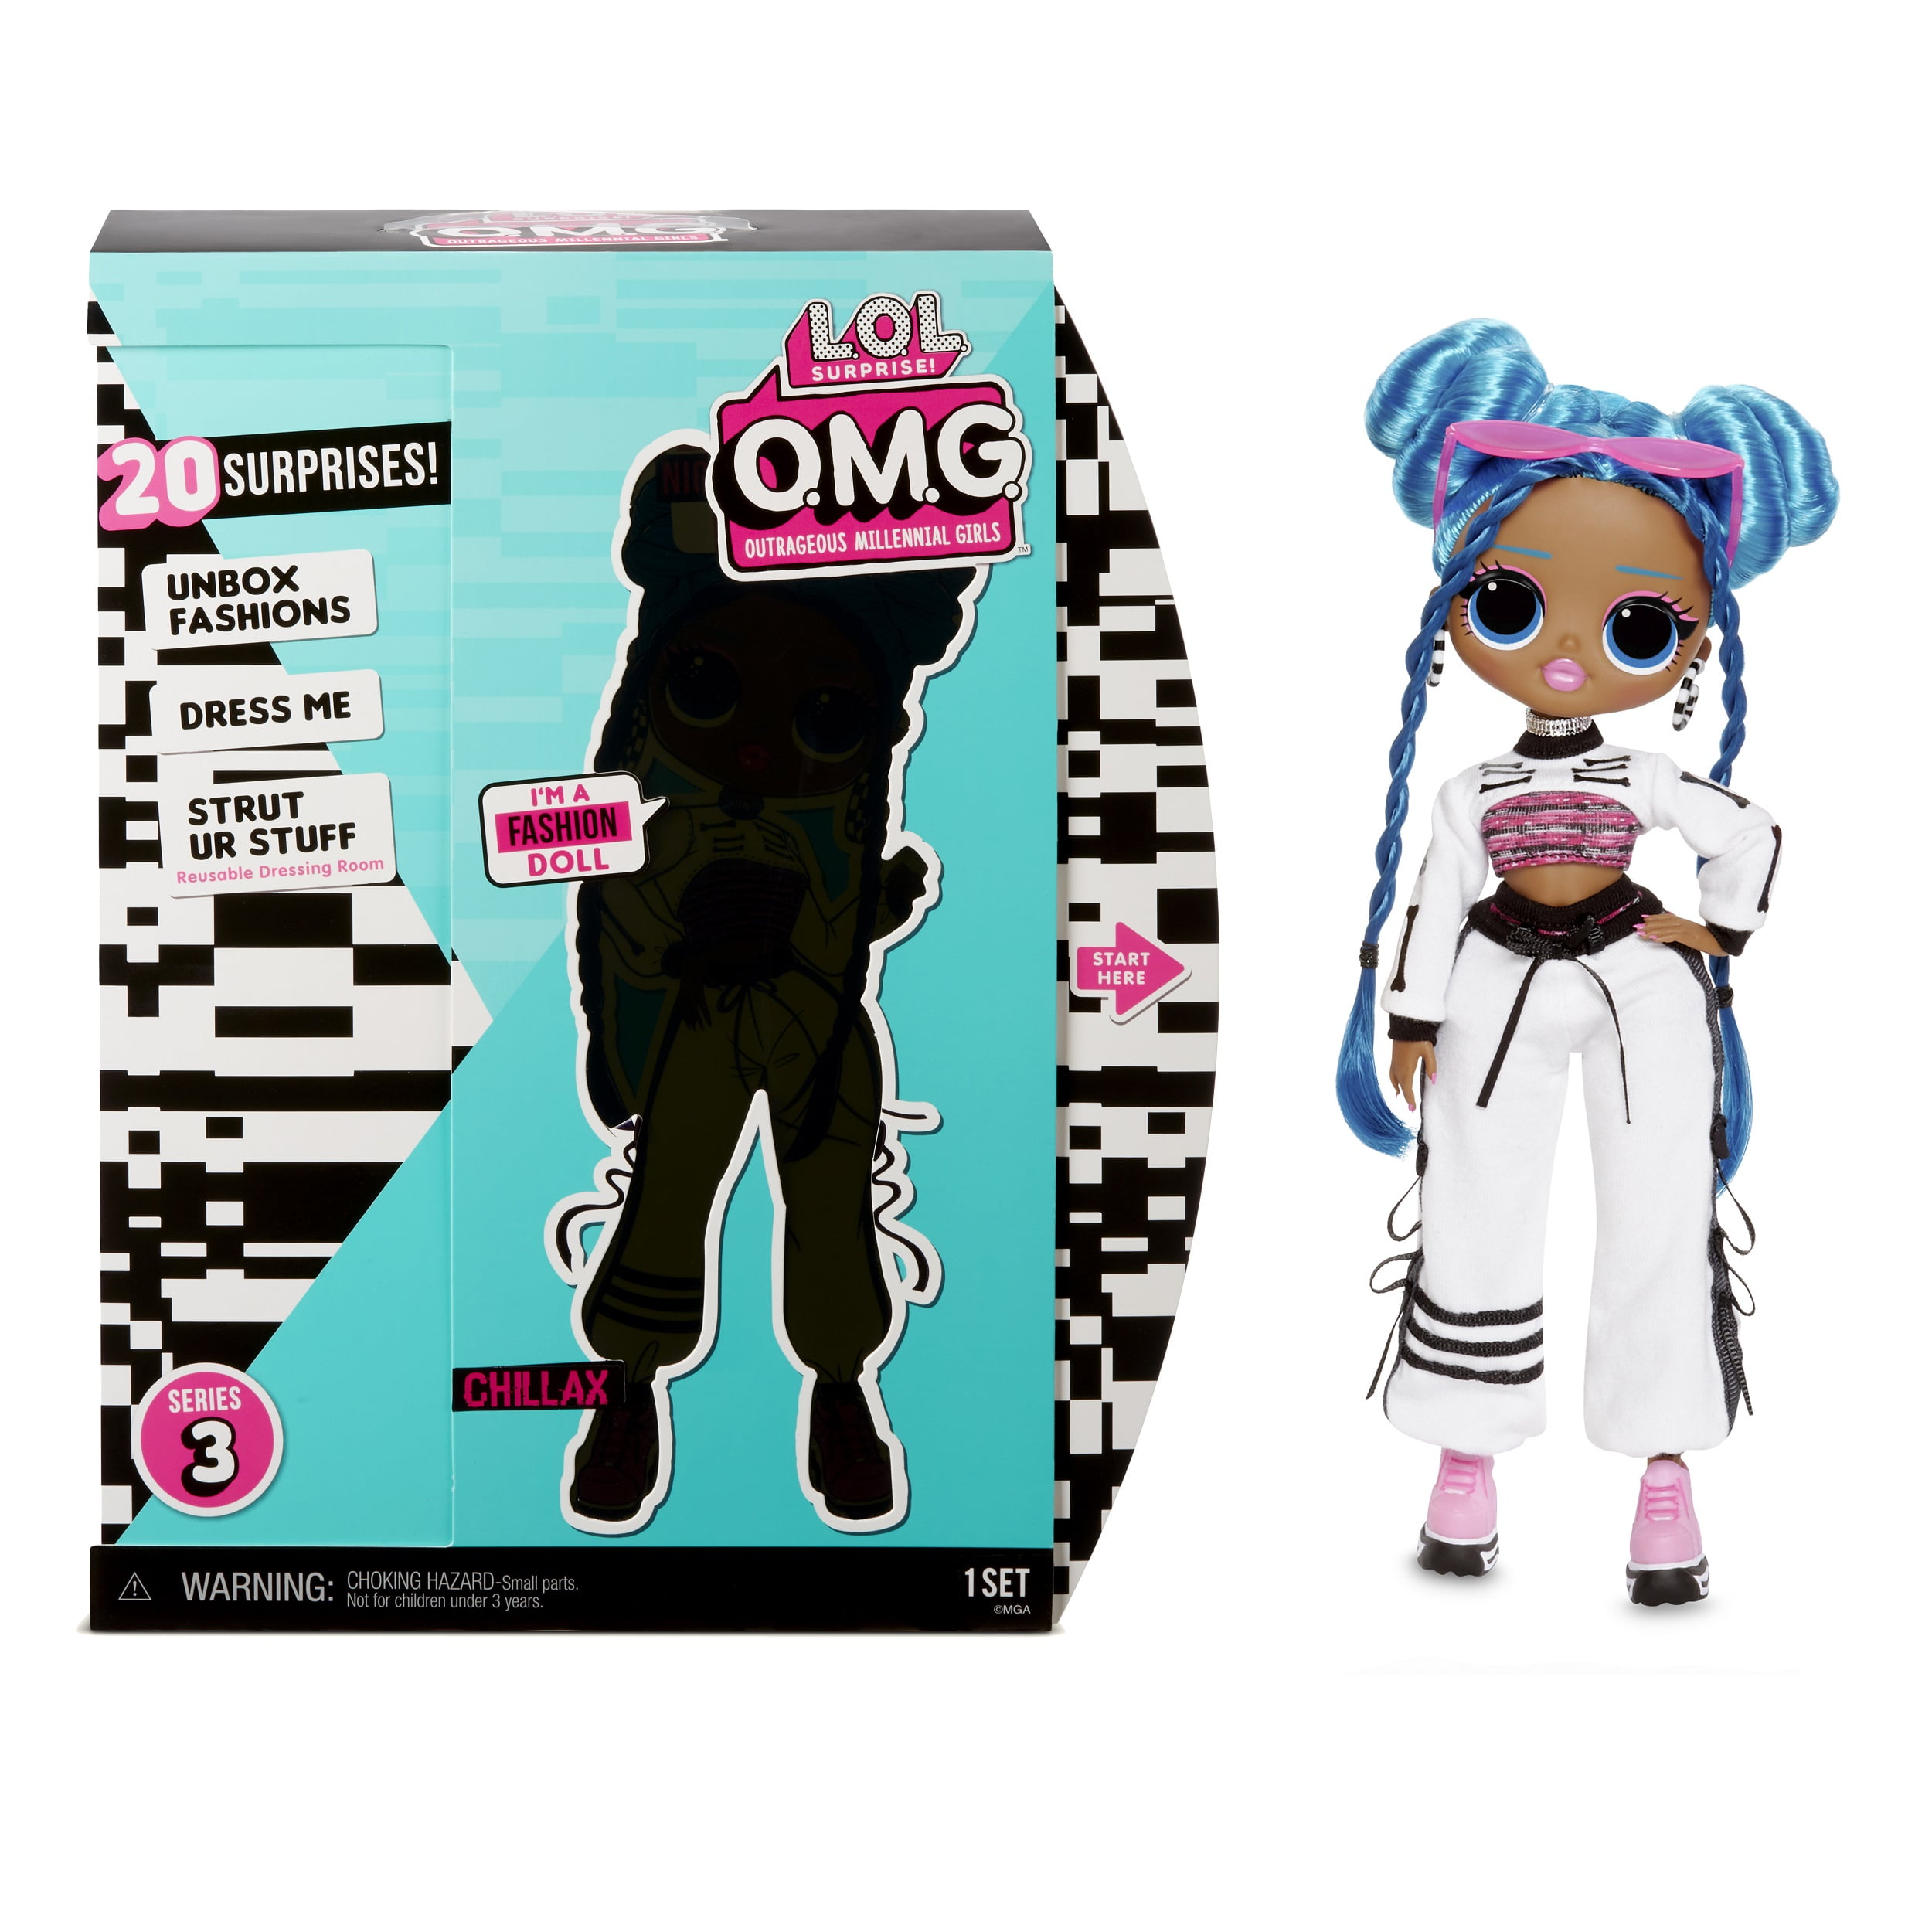 Details about   Authentic LOL Surprise Series 3 OMG Fashion Doll ROLLER CHICK IN HAND 